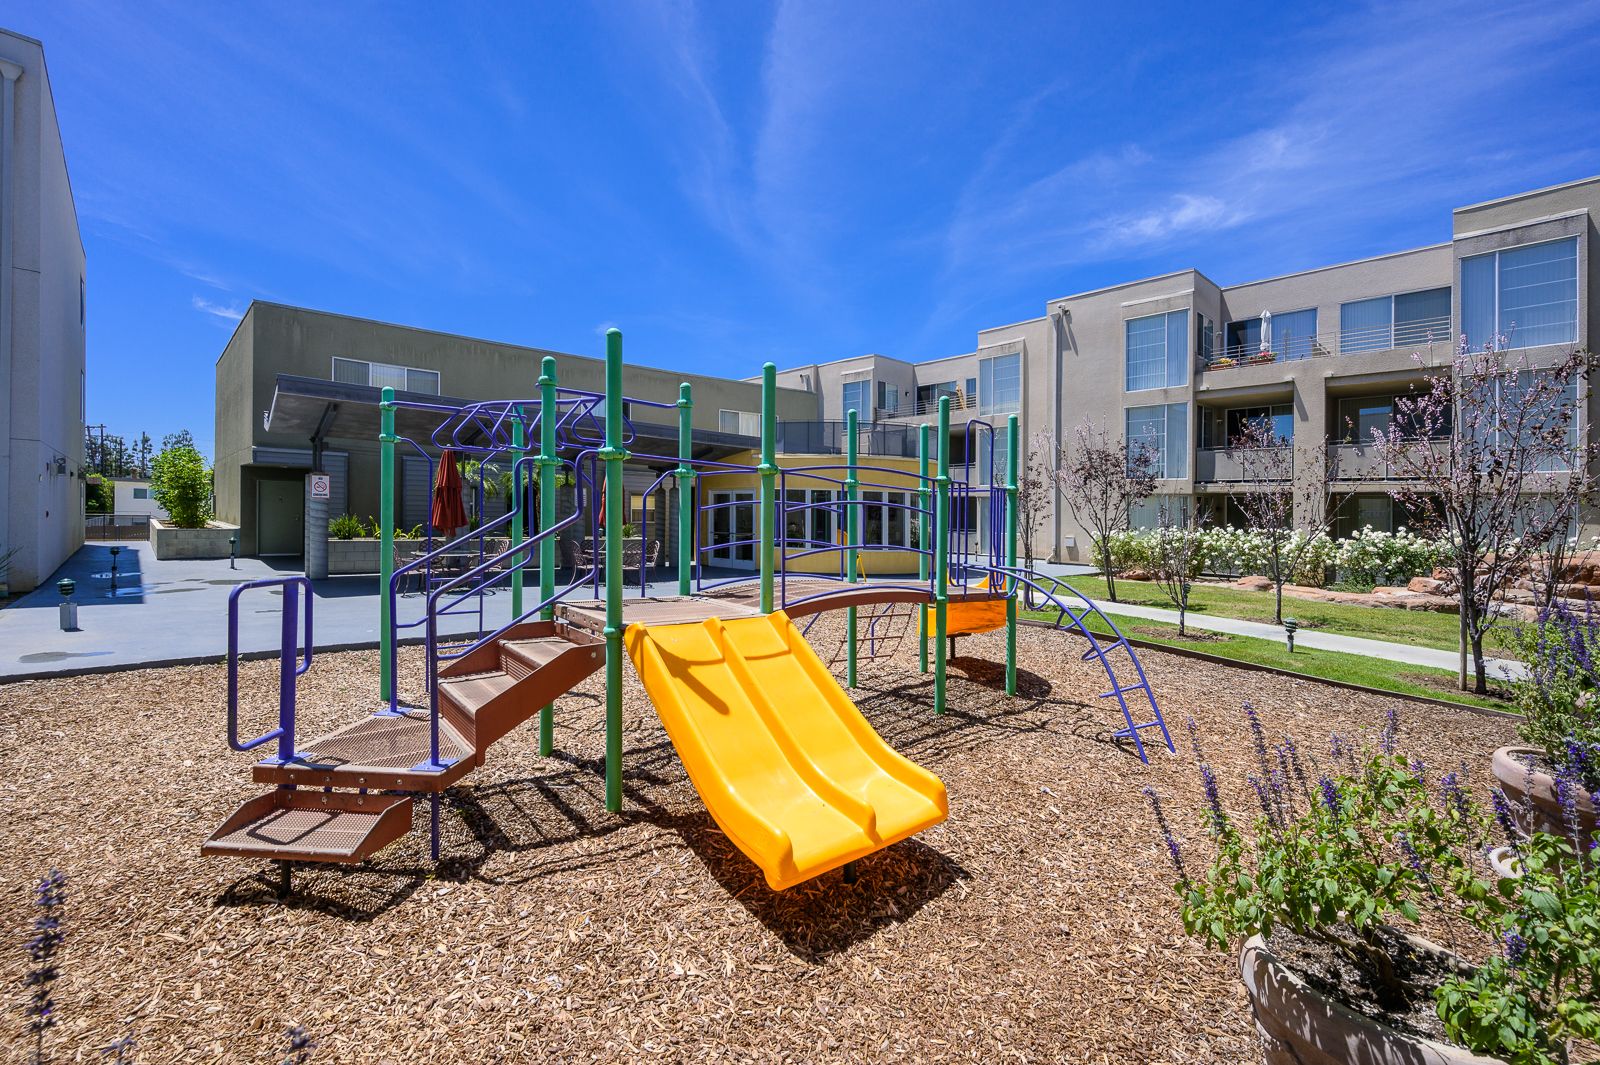 Large, outdoor playground set on top of woodchips.  Small grassy area with trees on the side.